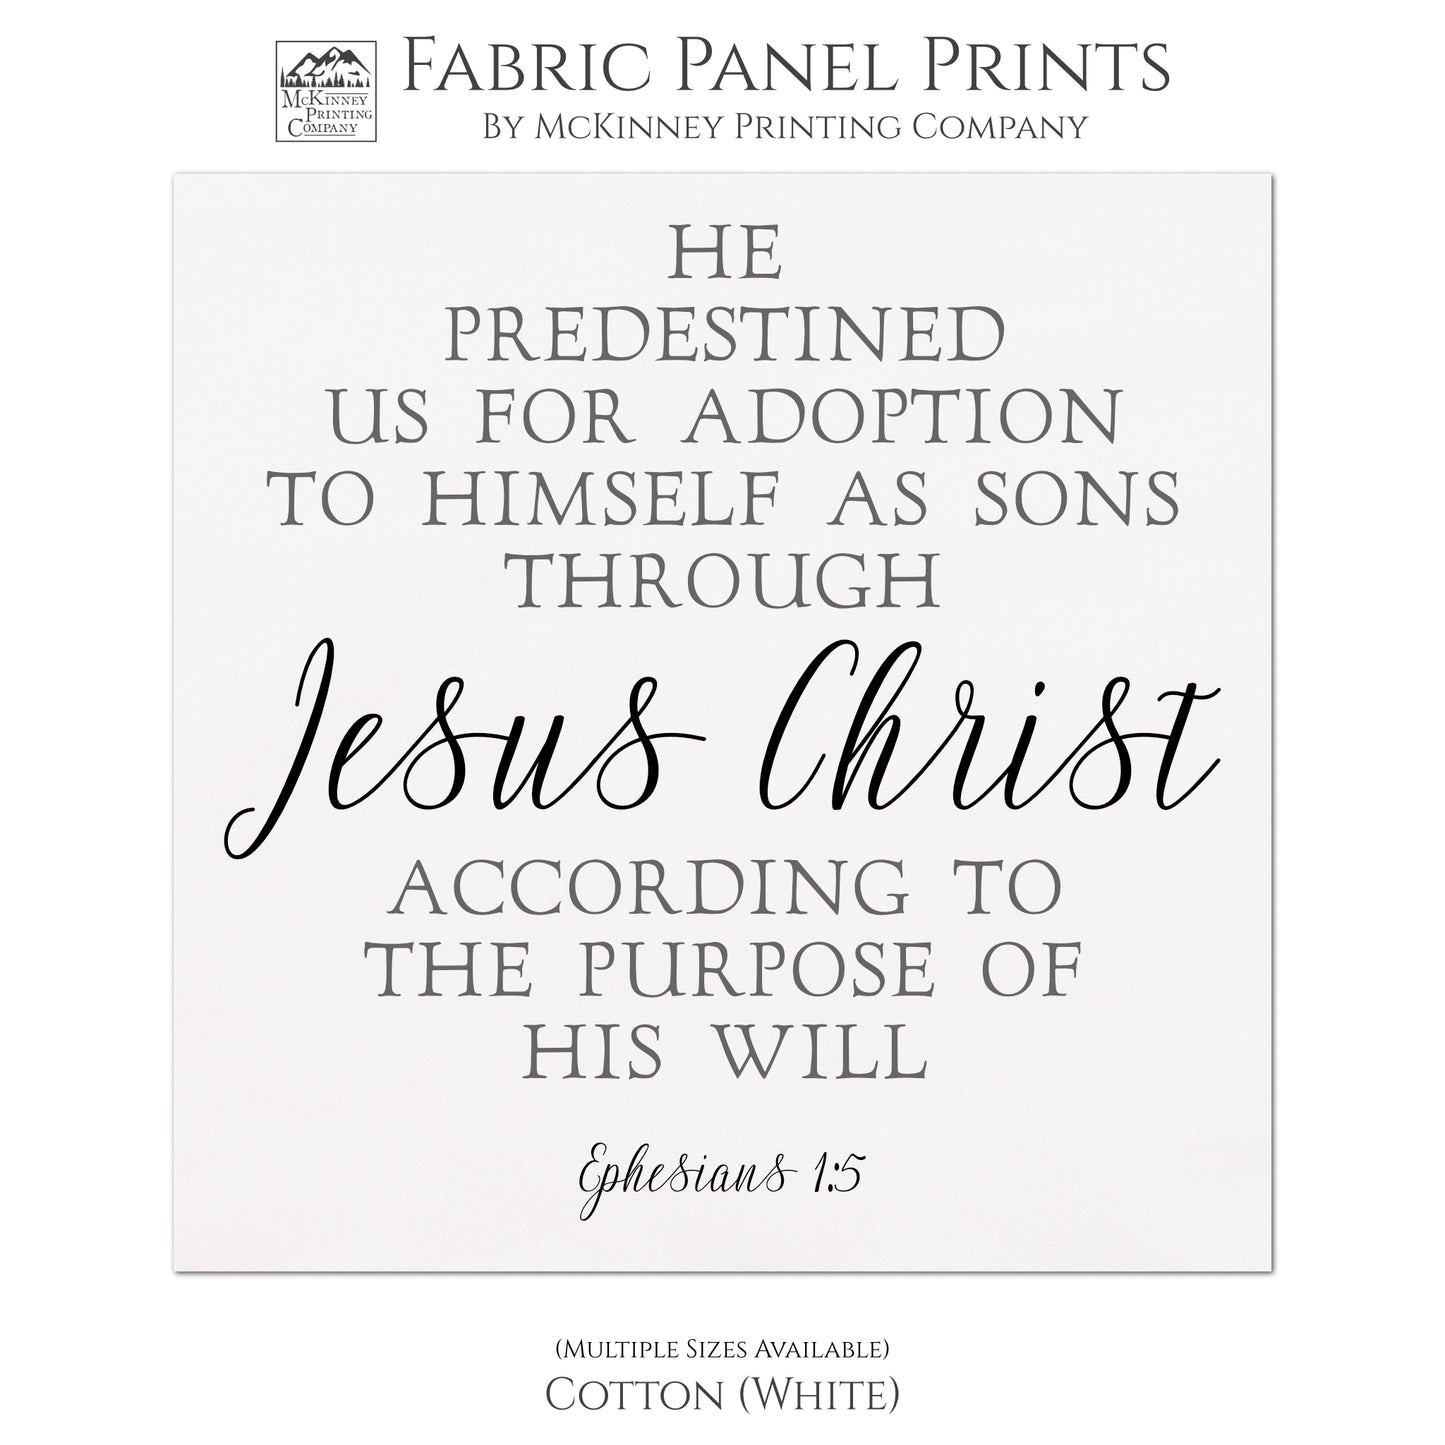 He predestined us for adoption to Himself as sons through Jesus Chris according to the purpose of His will - Ephesians 1 5 - Scripture Fabric - Ephesians 1:5, Jesus Christ, Baptism, First Communion, Quilt Block, Bible Verse, Christian, Confirmation - Cotton, White